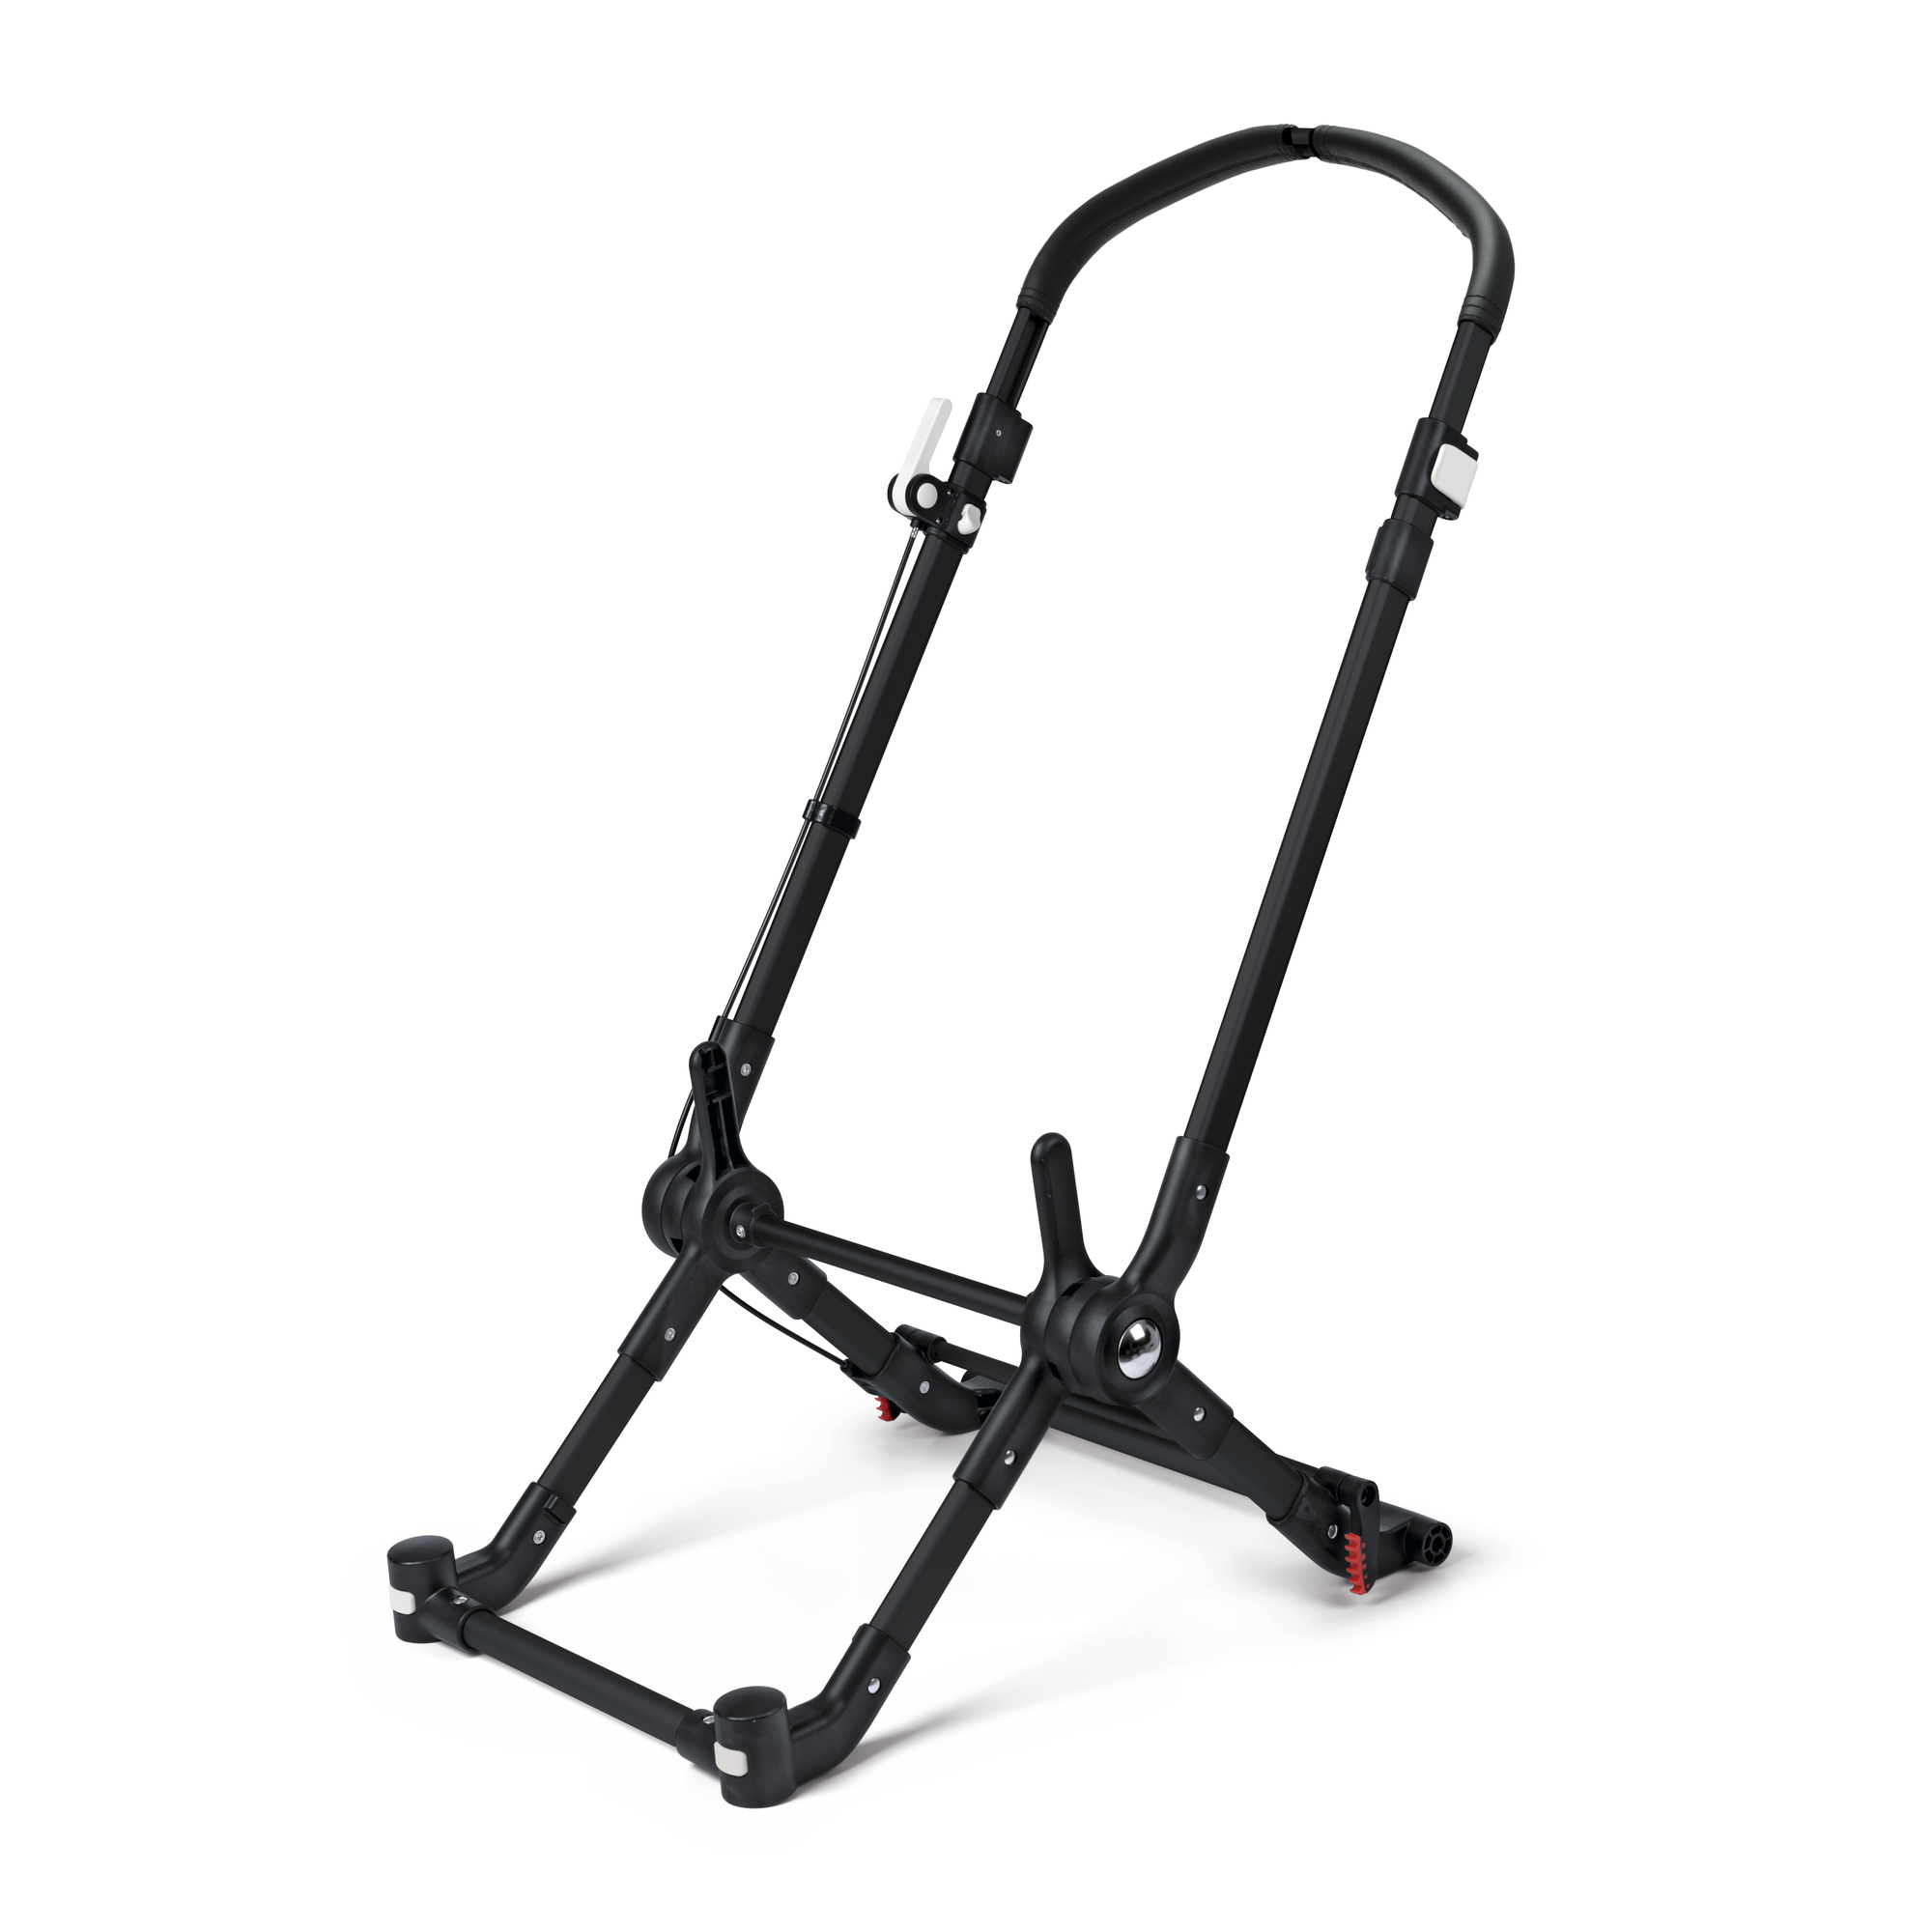 bugaboo cameleon 3 black chassis